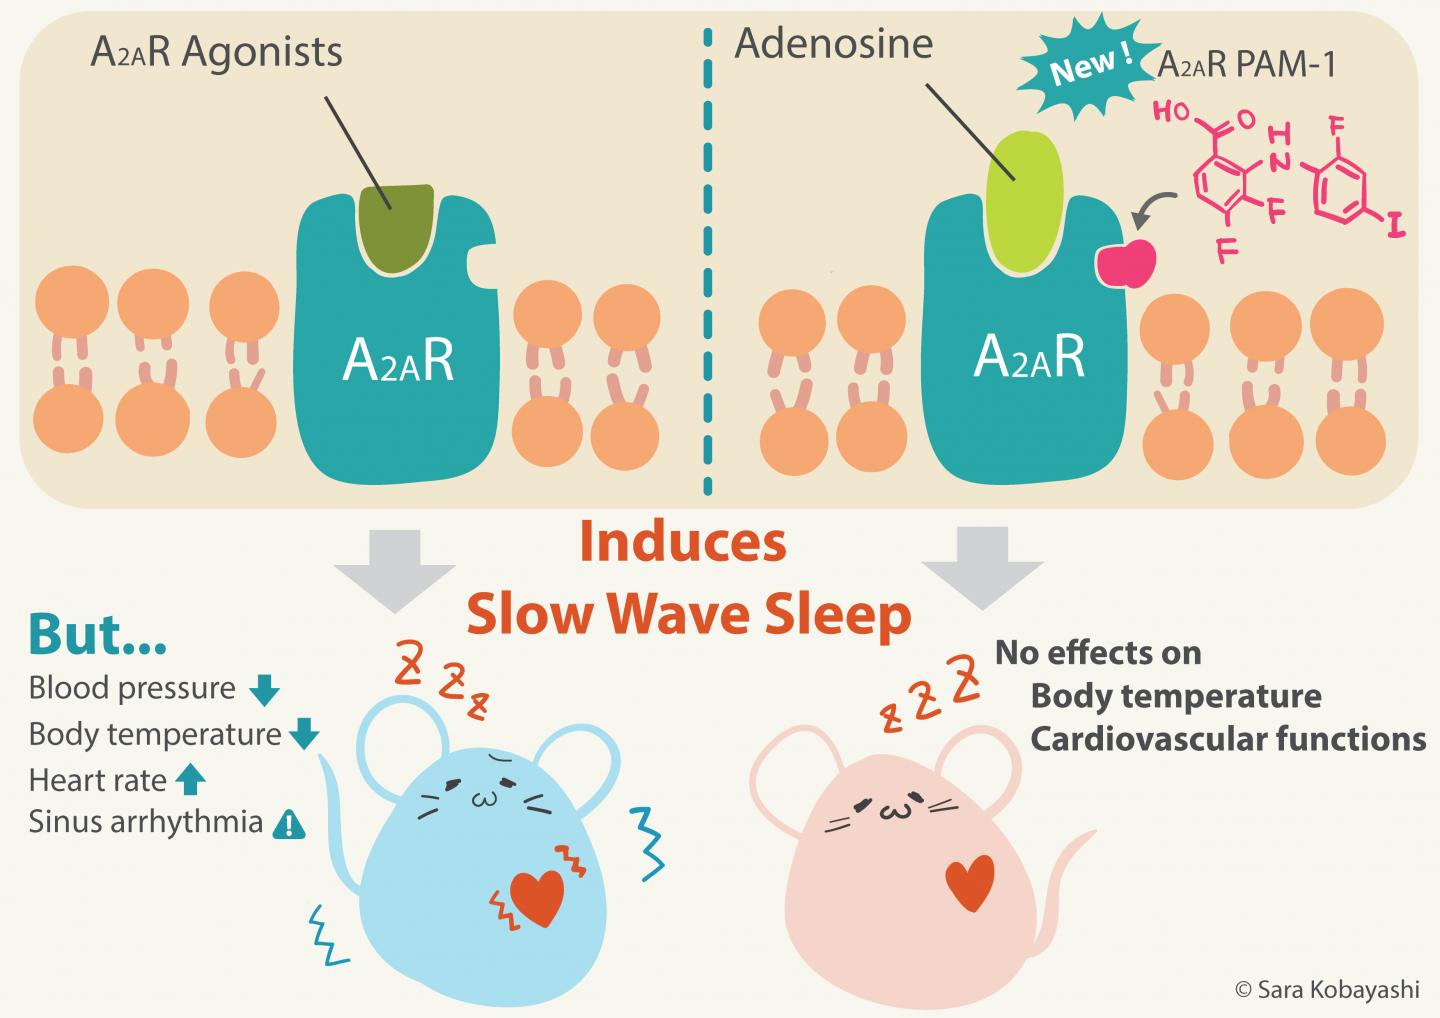 A New Therapeutic Avenue for Treating Insomnia